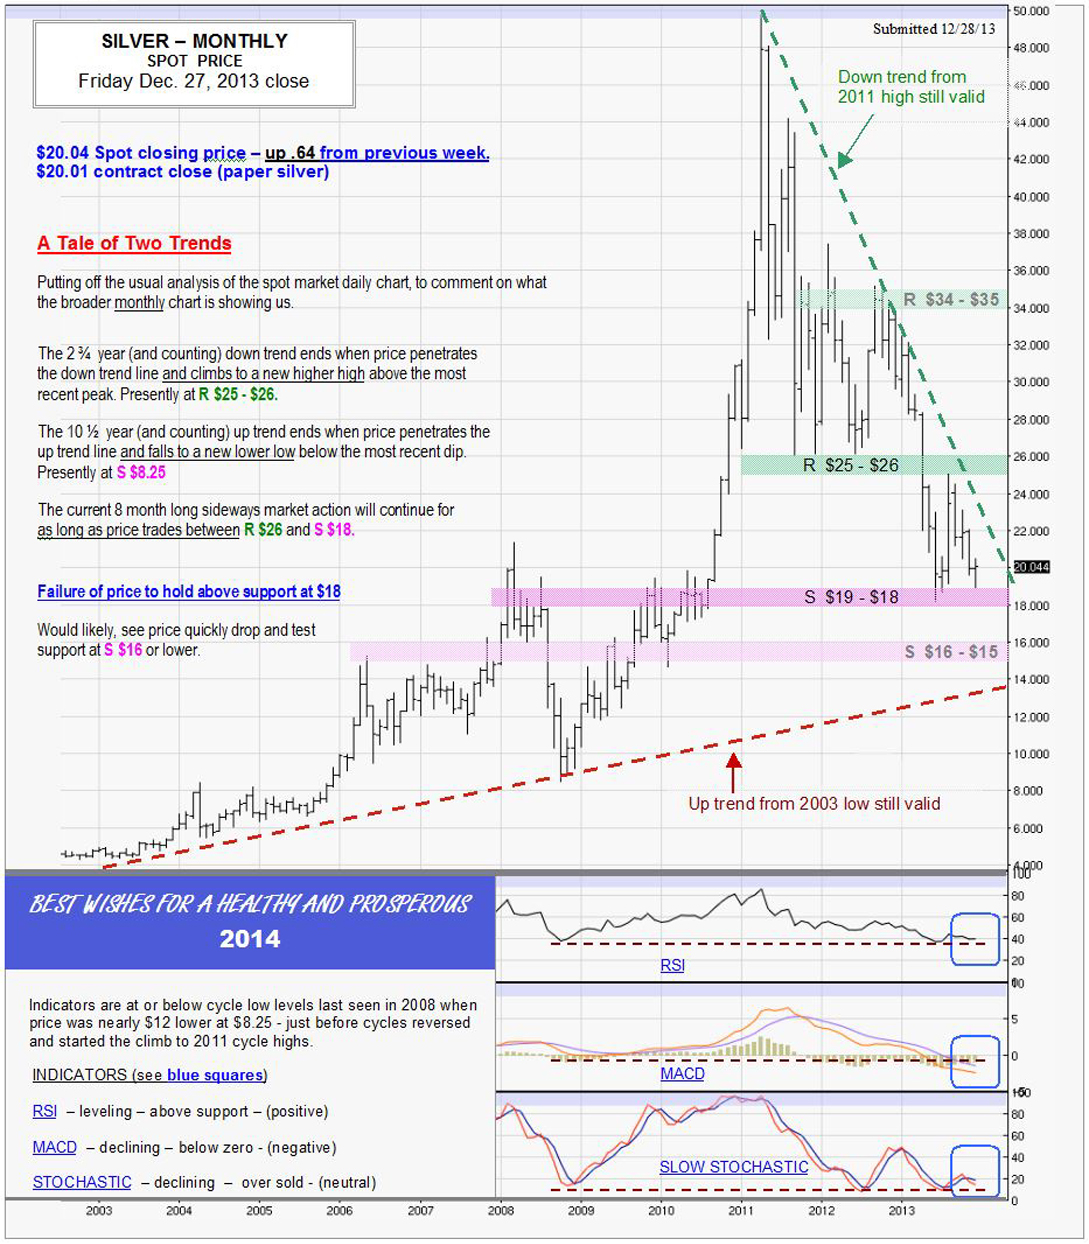 Dec 27, 2013 chart & commentary